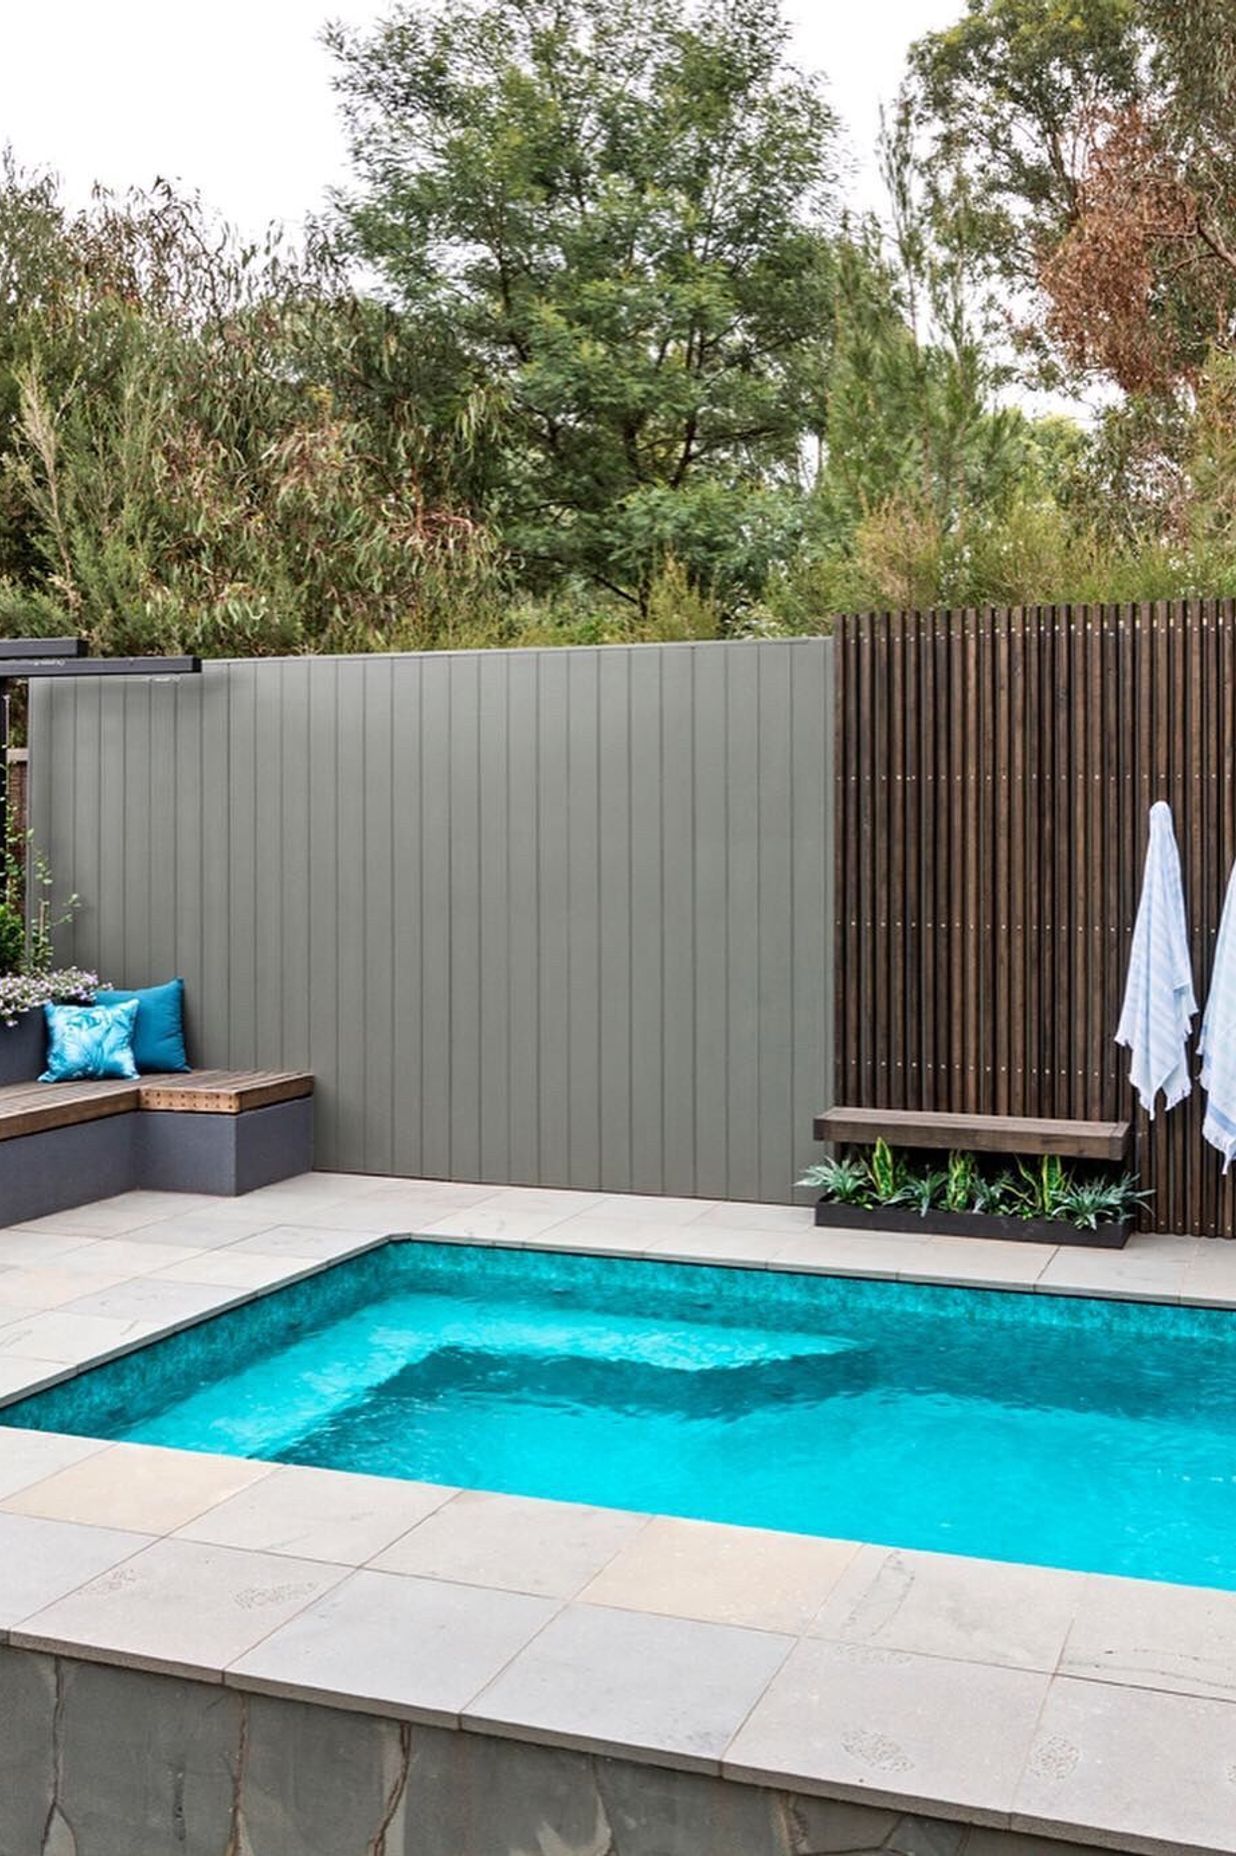 Photography: Patrick Redmond | Small pool for courtyard space